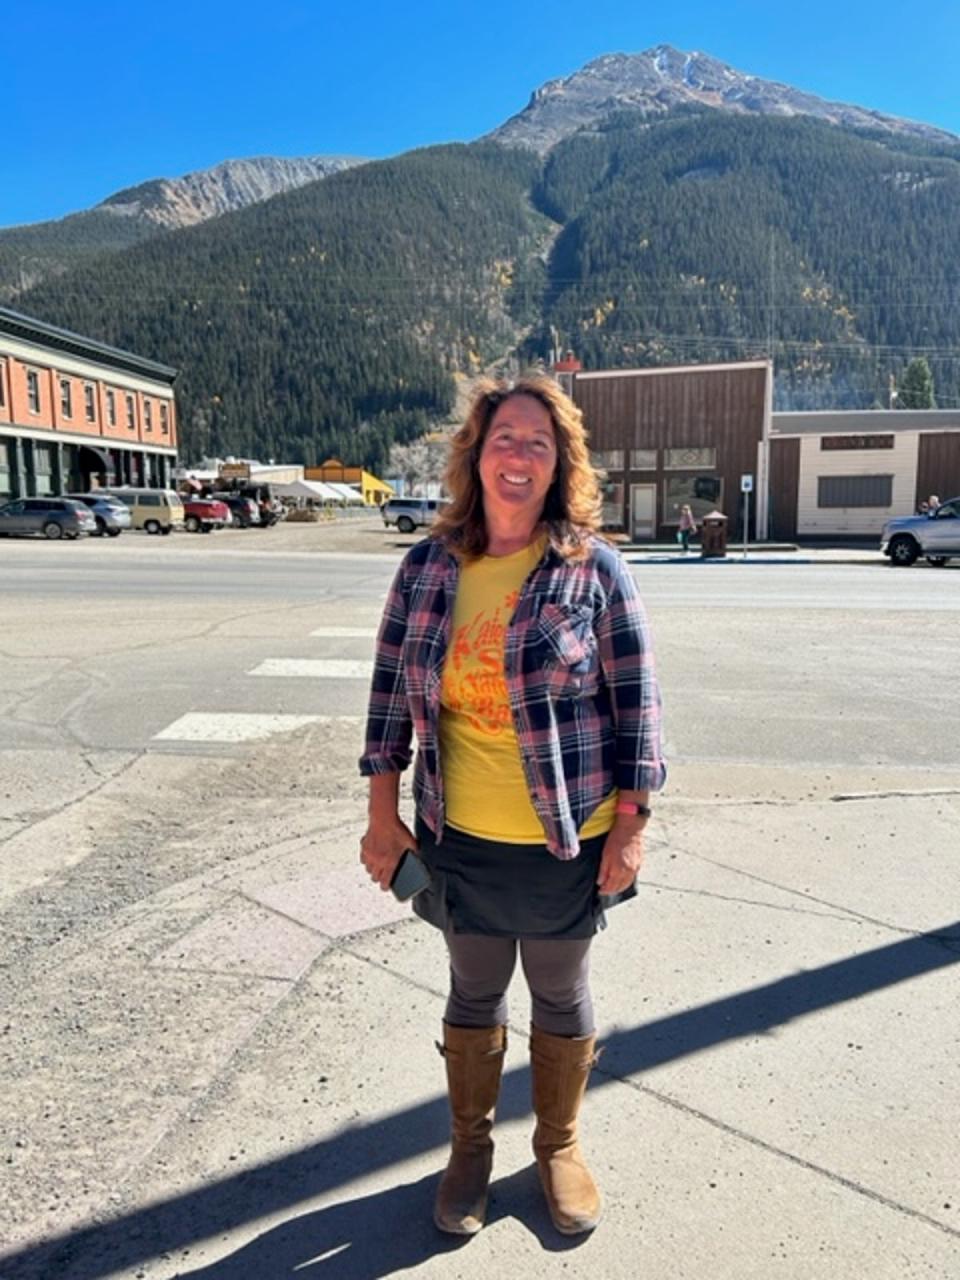 DeAnne Gallegos, San Juan County’s public information officer as well as the executive director of Silverton’s Chamber of Commerce, says local tourist reps had nothing to do with the sighting (Sheila Flynn)